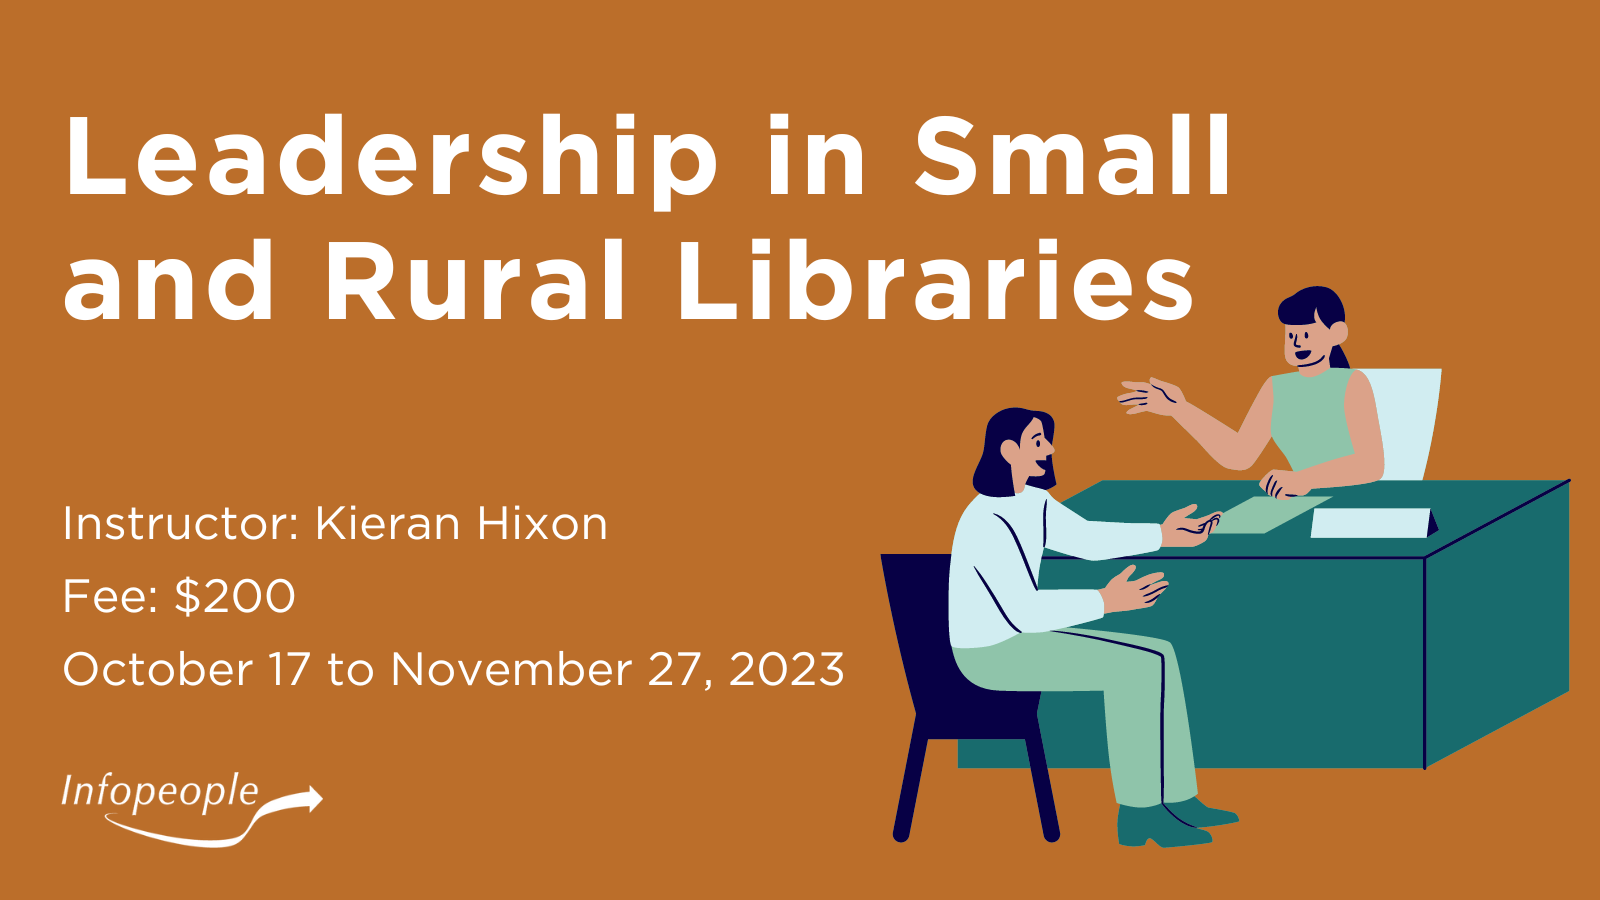 Leadership in Small and Rural Libraries - an Infopeople course. October 17 to November 27, 2023. Instructor: Kieran Hixon. Fee: $200. A woman behind a desk speaking with an employee.